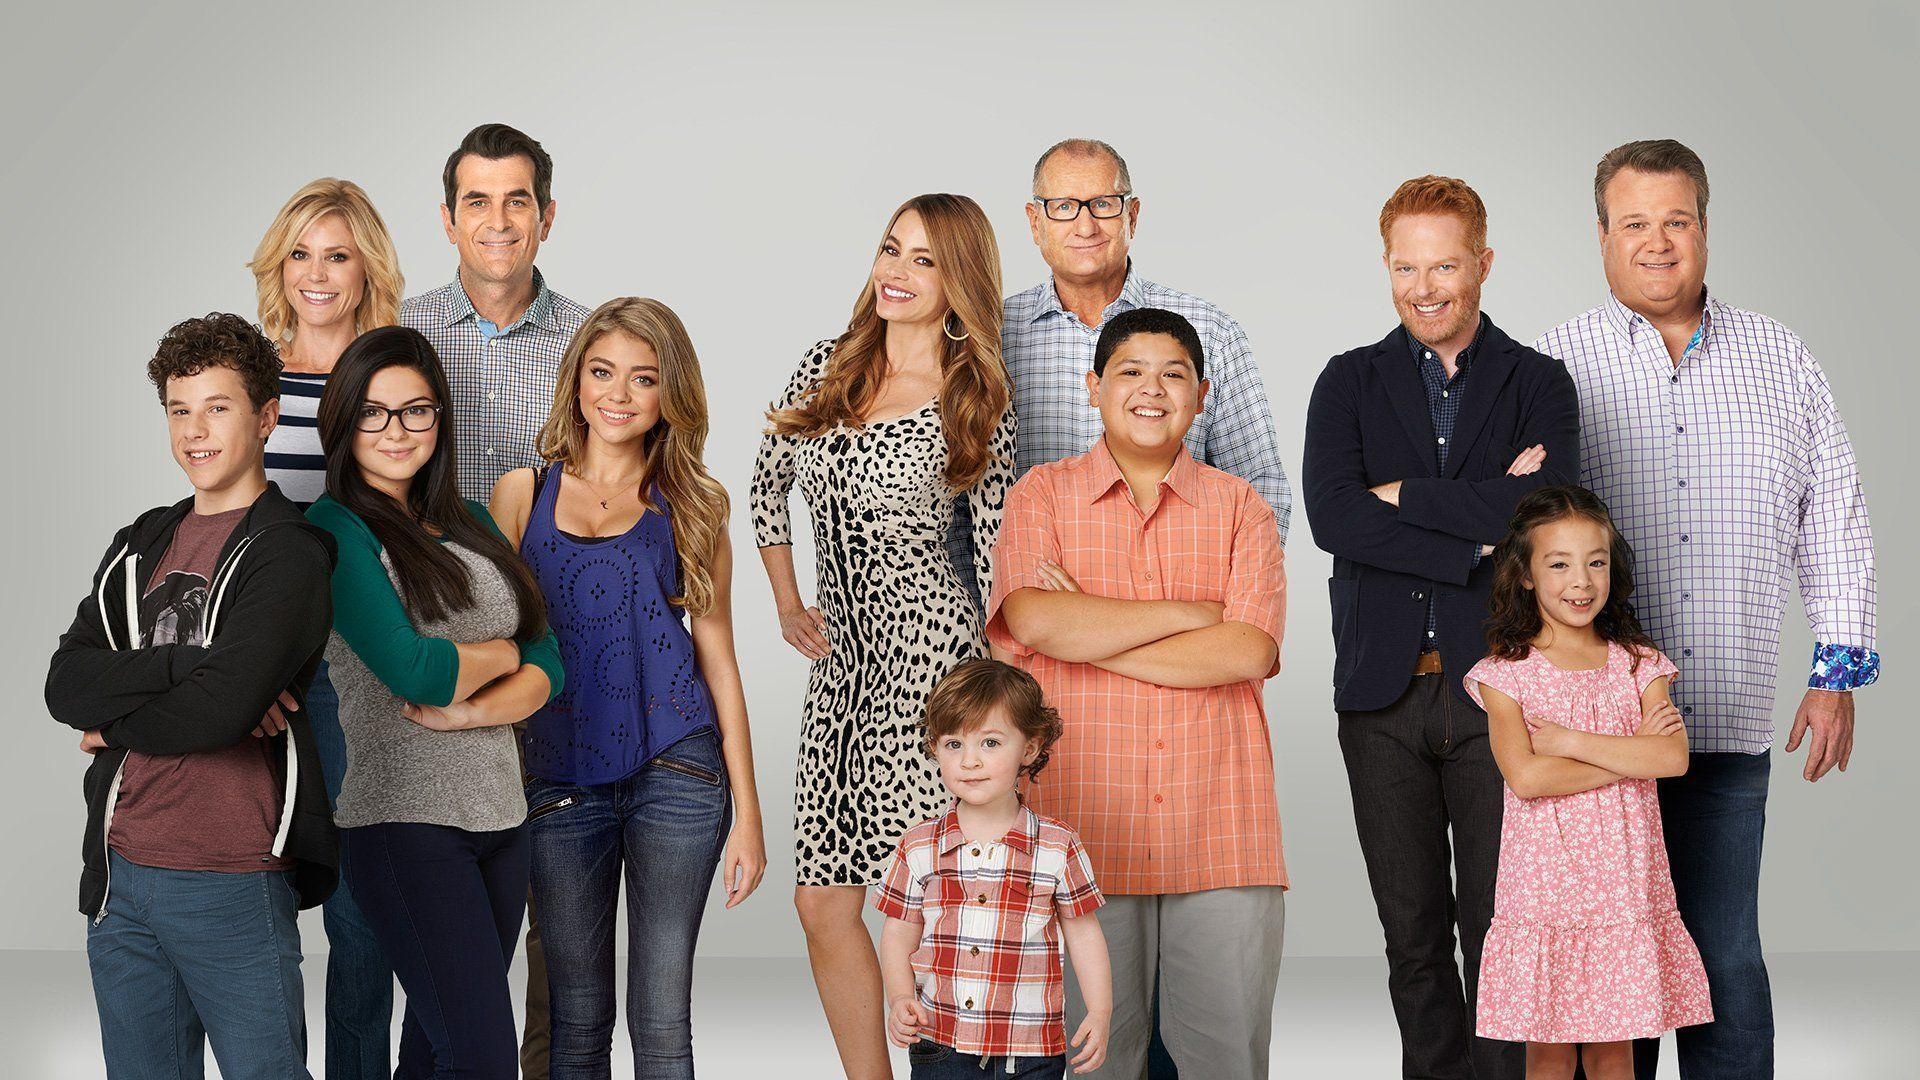 Modern Family, Top free wallpapers, Hilarious and heartwarming, Beloved characters, 1920x1080 Full HD Desktop